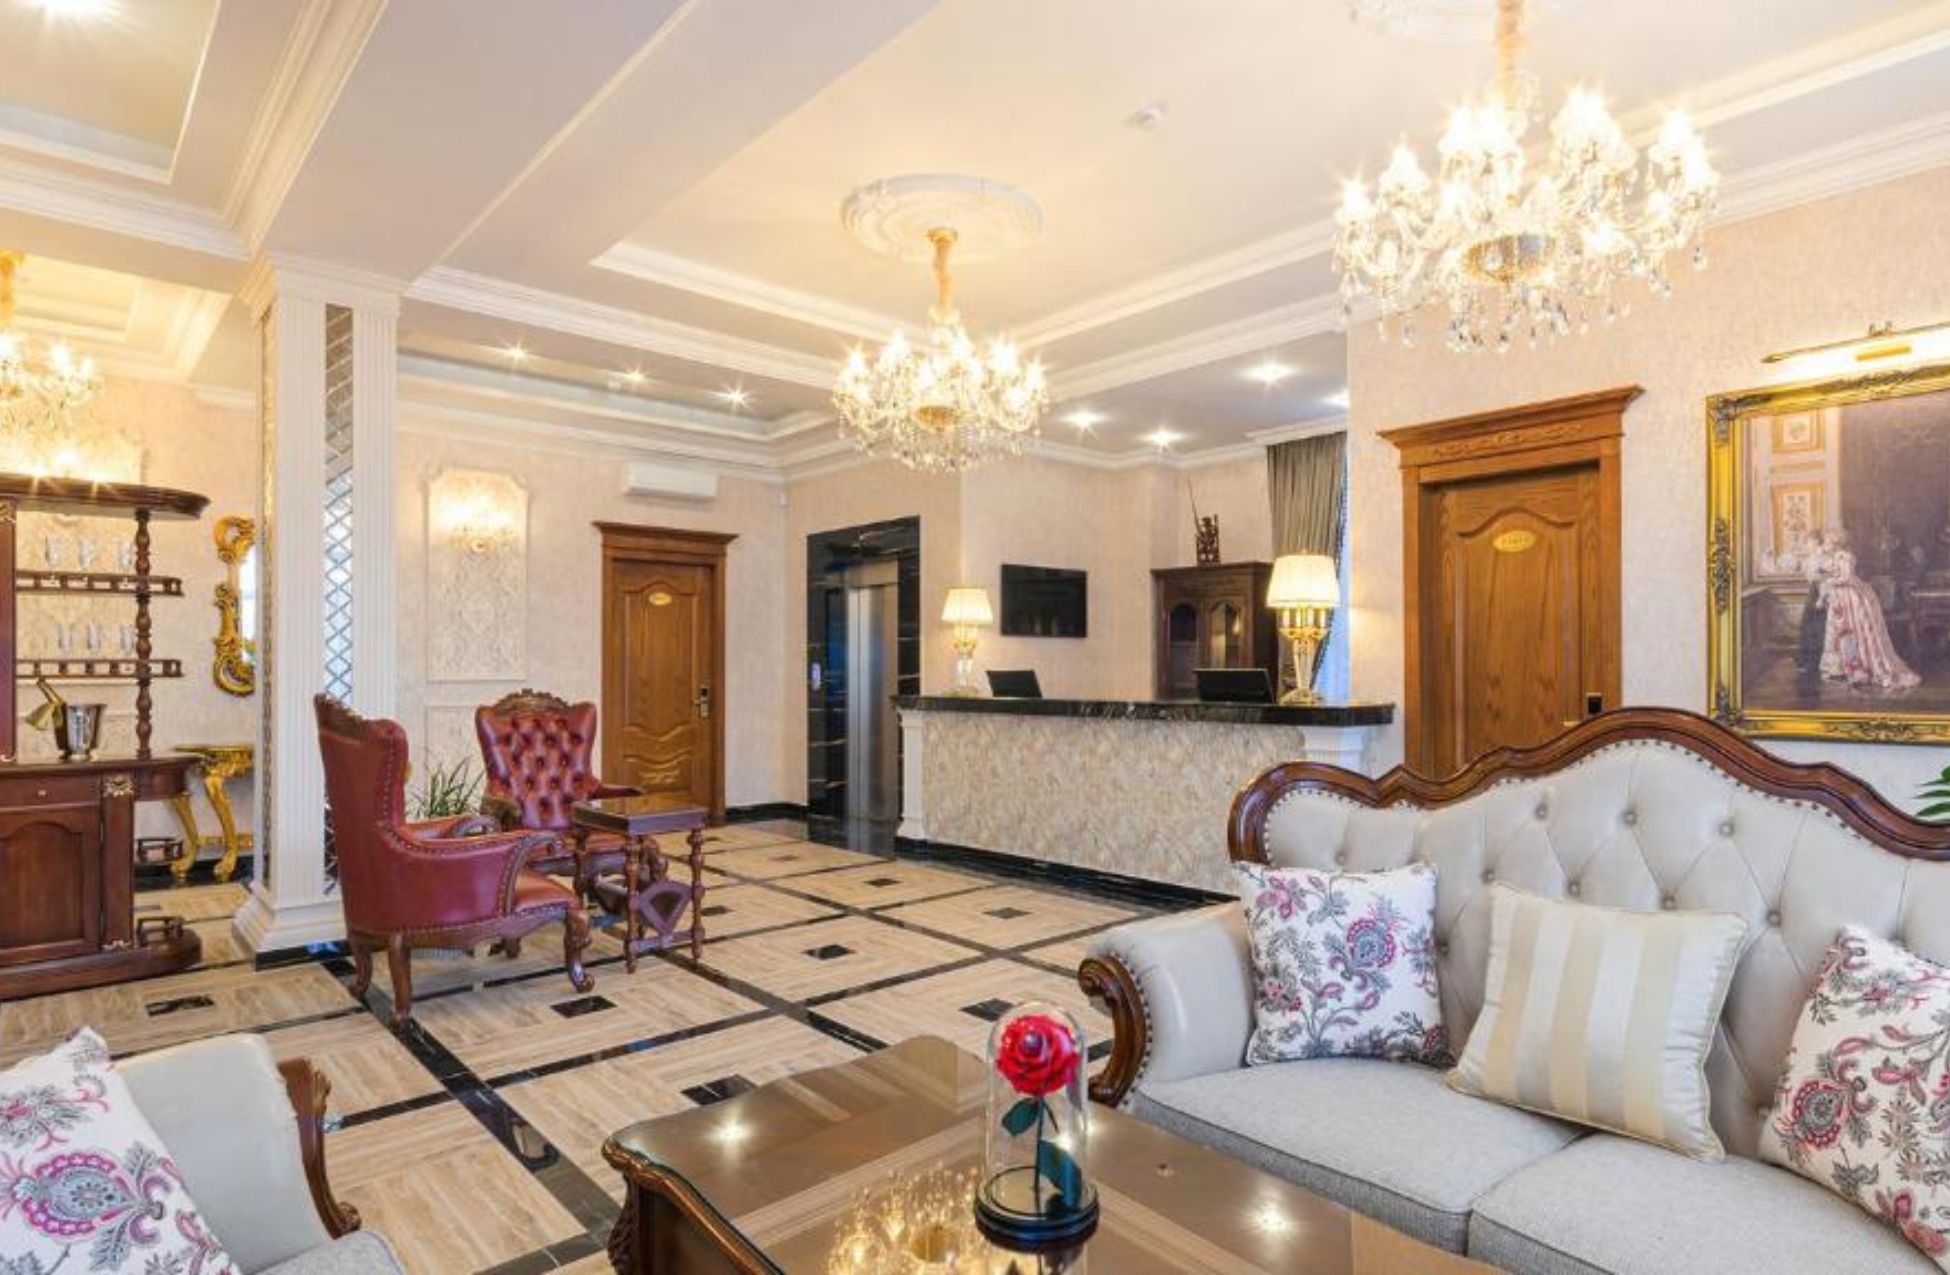 Gregory Boutique Hotel - Best Hotels In Chisinau